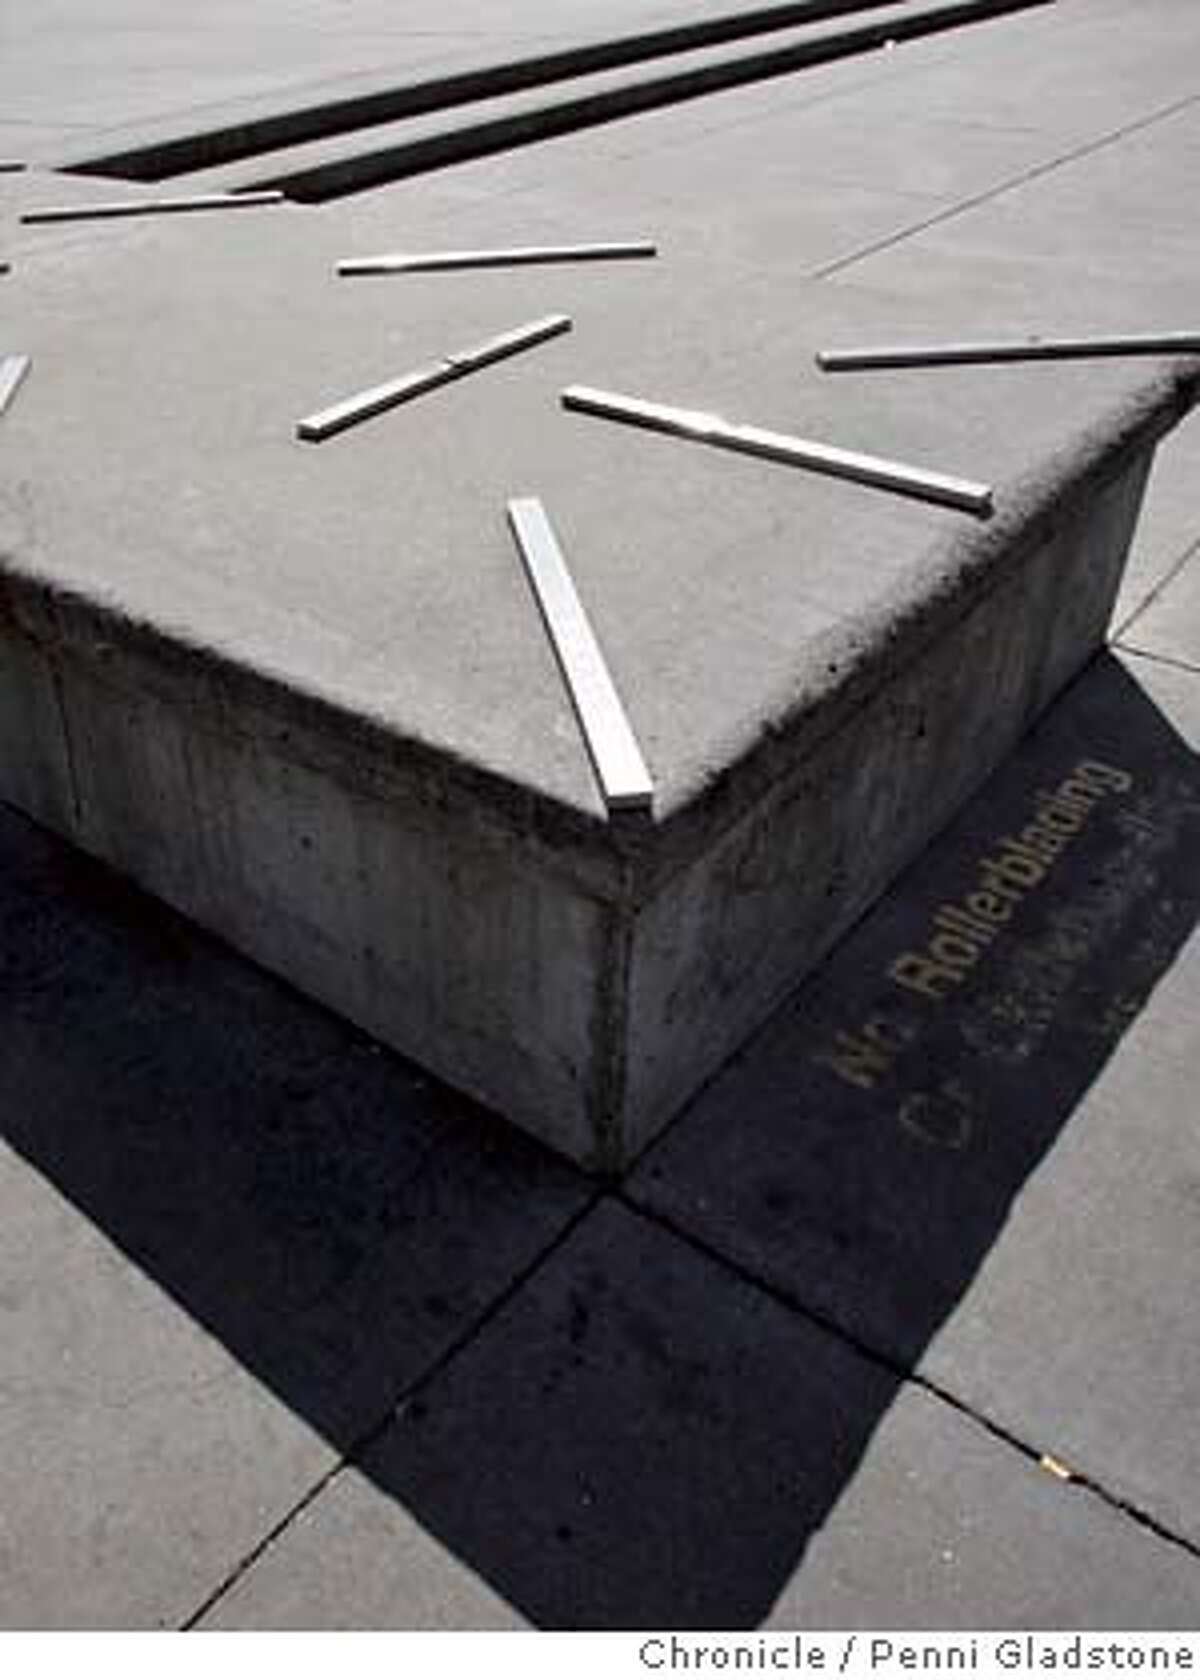 PLACE16 On the Embarcadero, anti-skateboard clips. Column is on the landscape of 2006 photo by penni gladstone, sf chronicle Photo taken on 5/11/06, in Berkeley, CA.